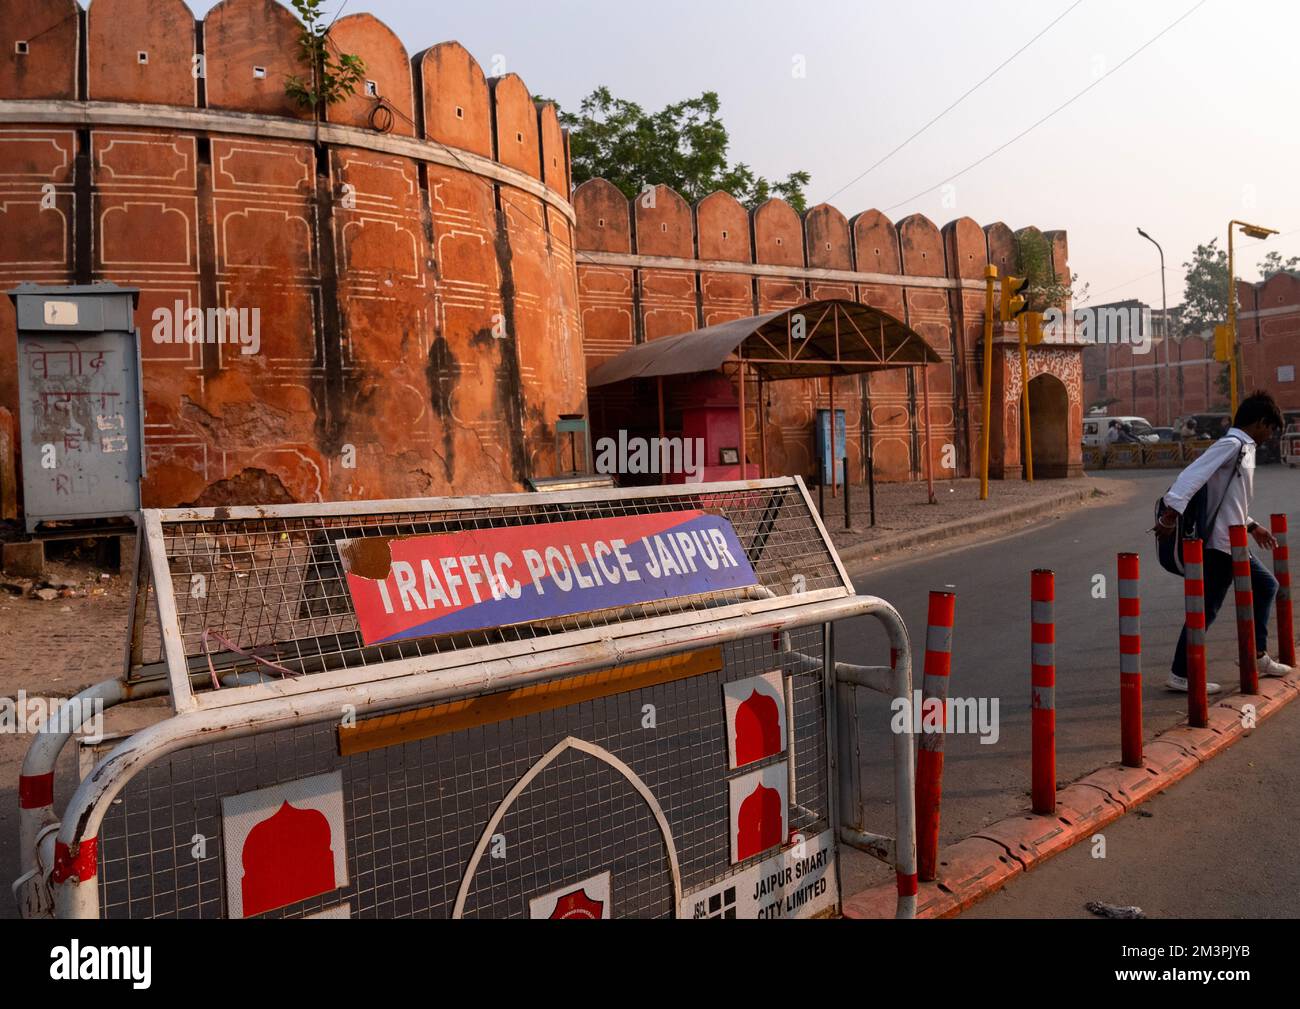 Traffic police barriers in the old town, Rajasthan, Jaipur, India Stock Photo